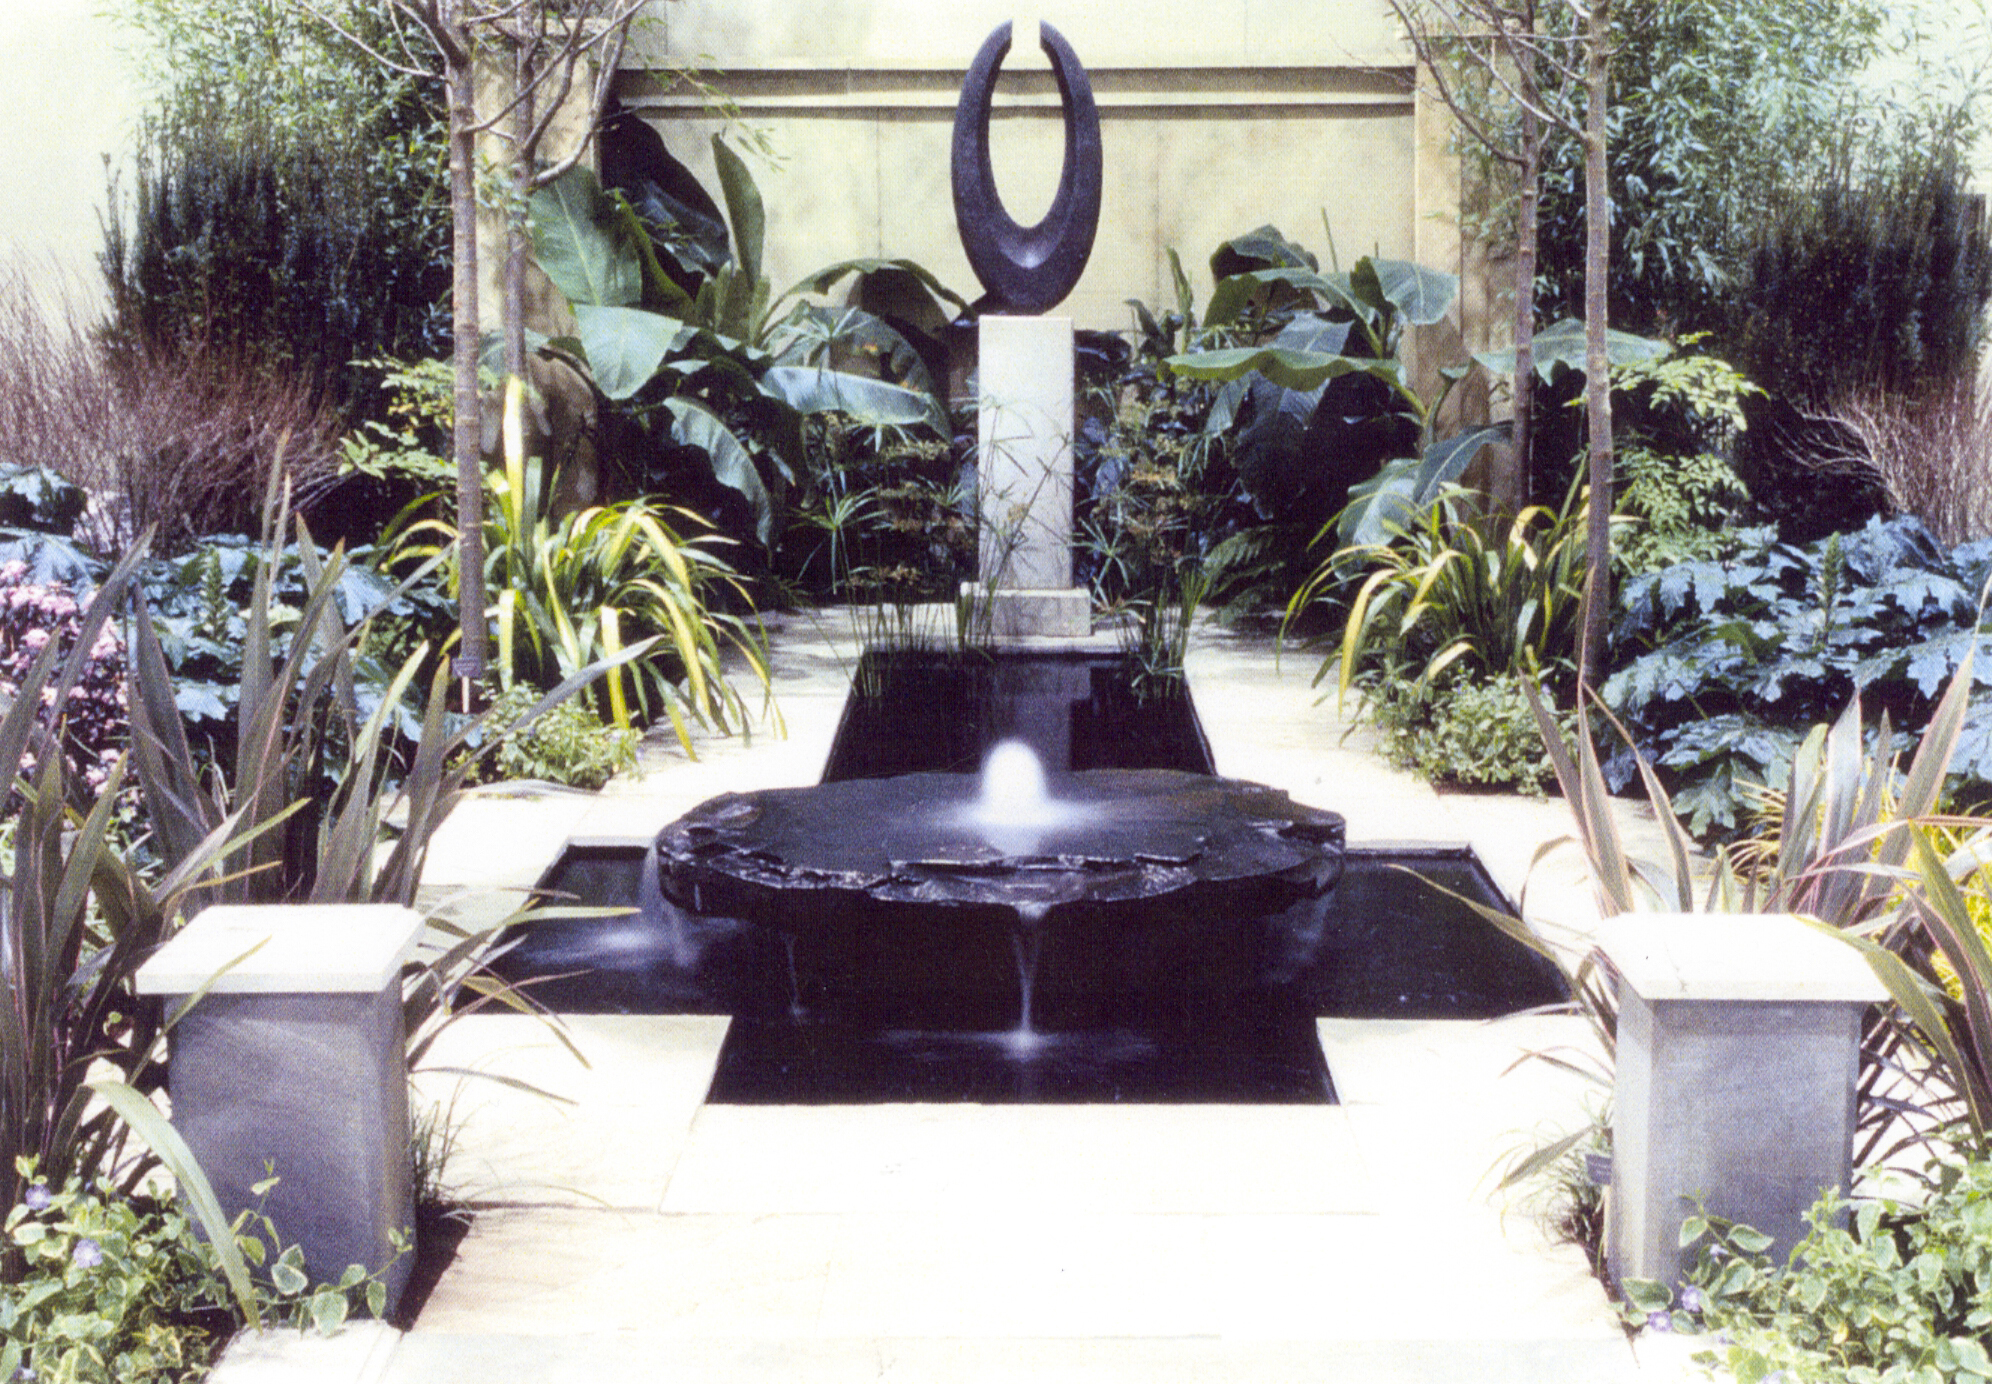 Display gardens Rich created for the Northwest Flower and Garden Show in Seattle. This was a gold medal, award winning design.  "Threshold" a black granite sculpture by Jim Ballard. 